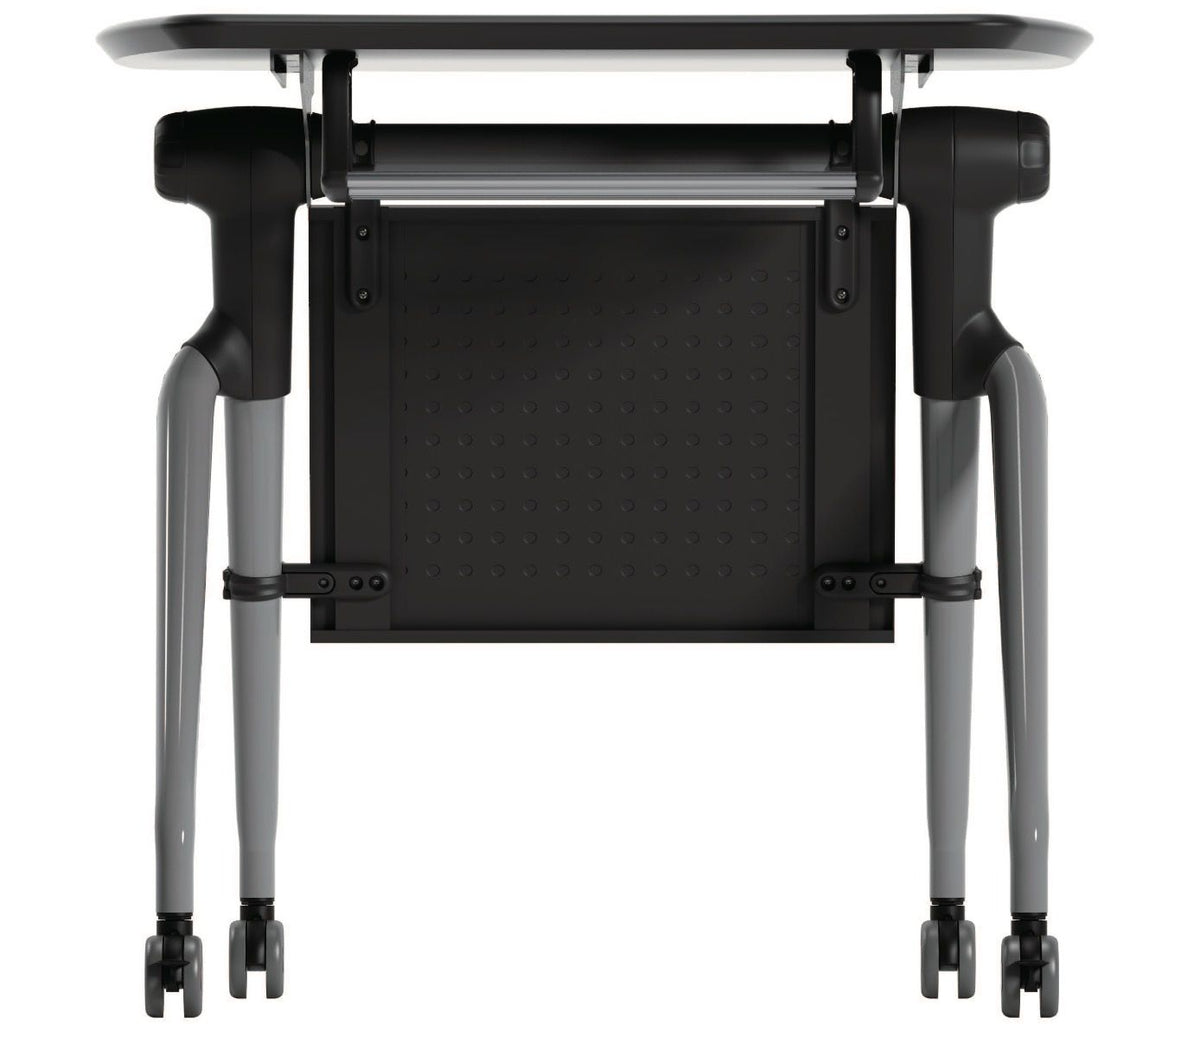 SYNCLINE MOBILE FLIP TOP TABLE